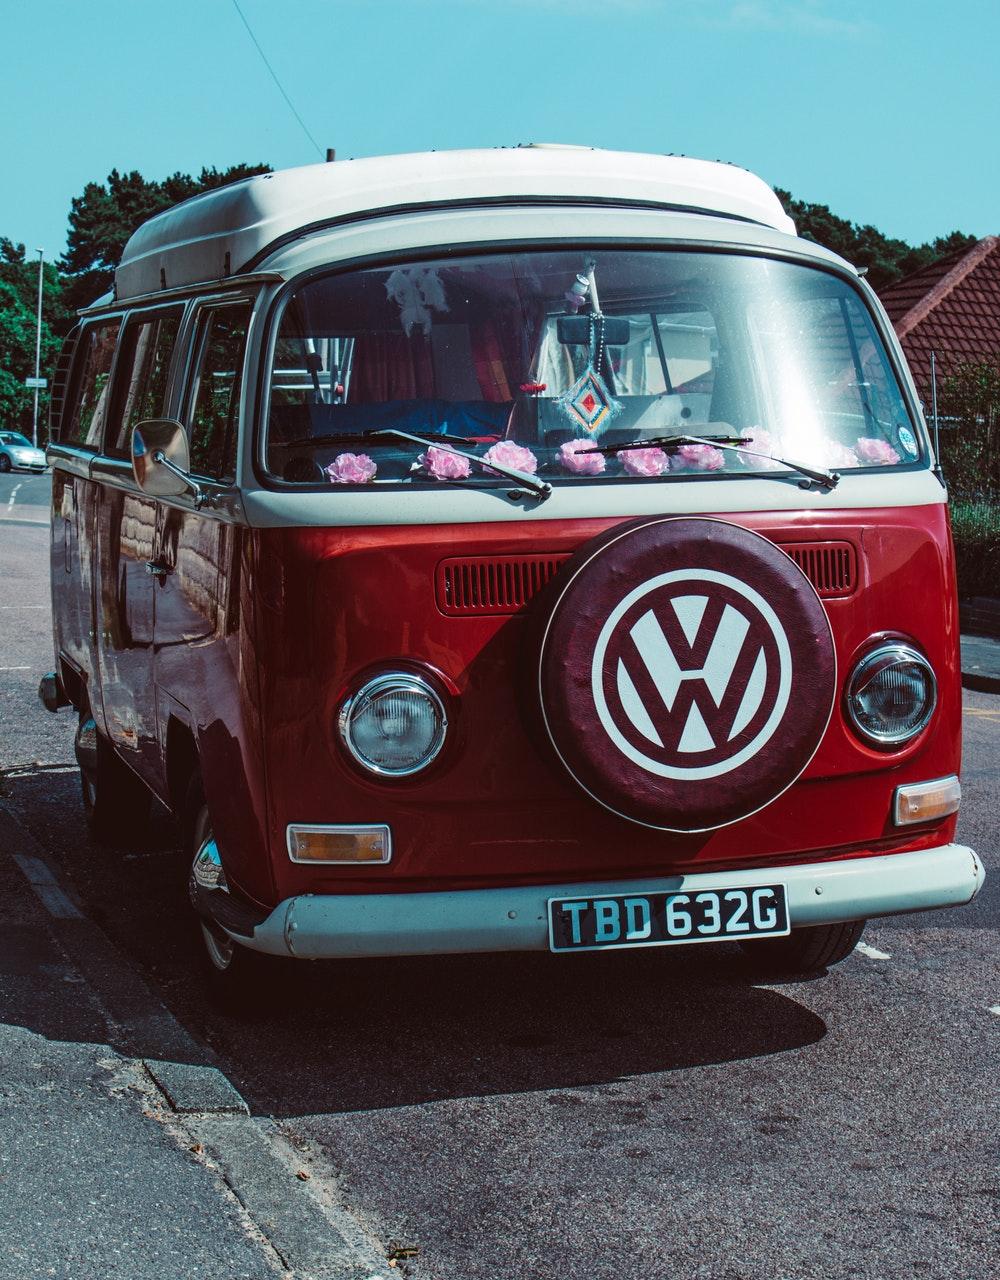 Vw Camper Picture. Download Free Image